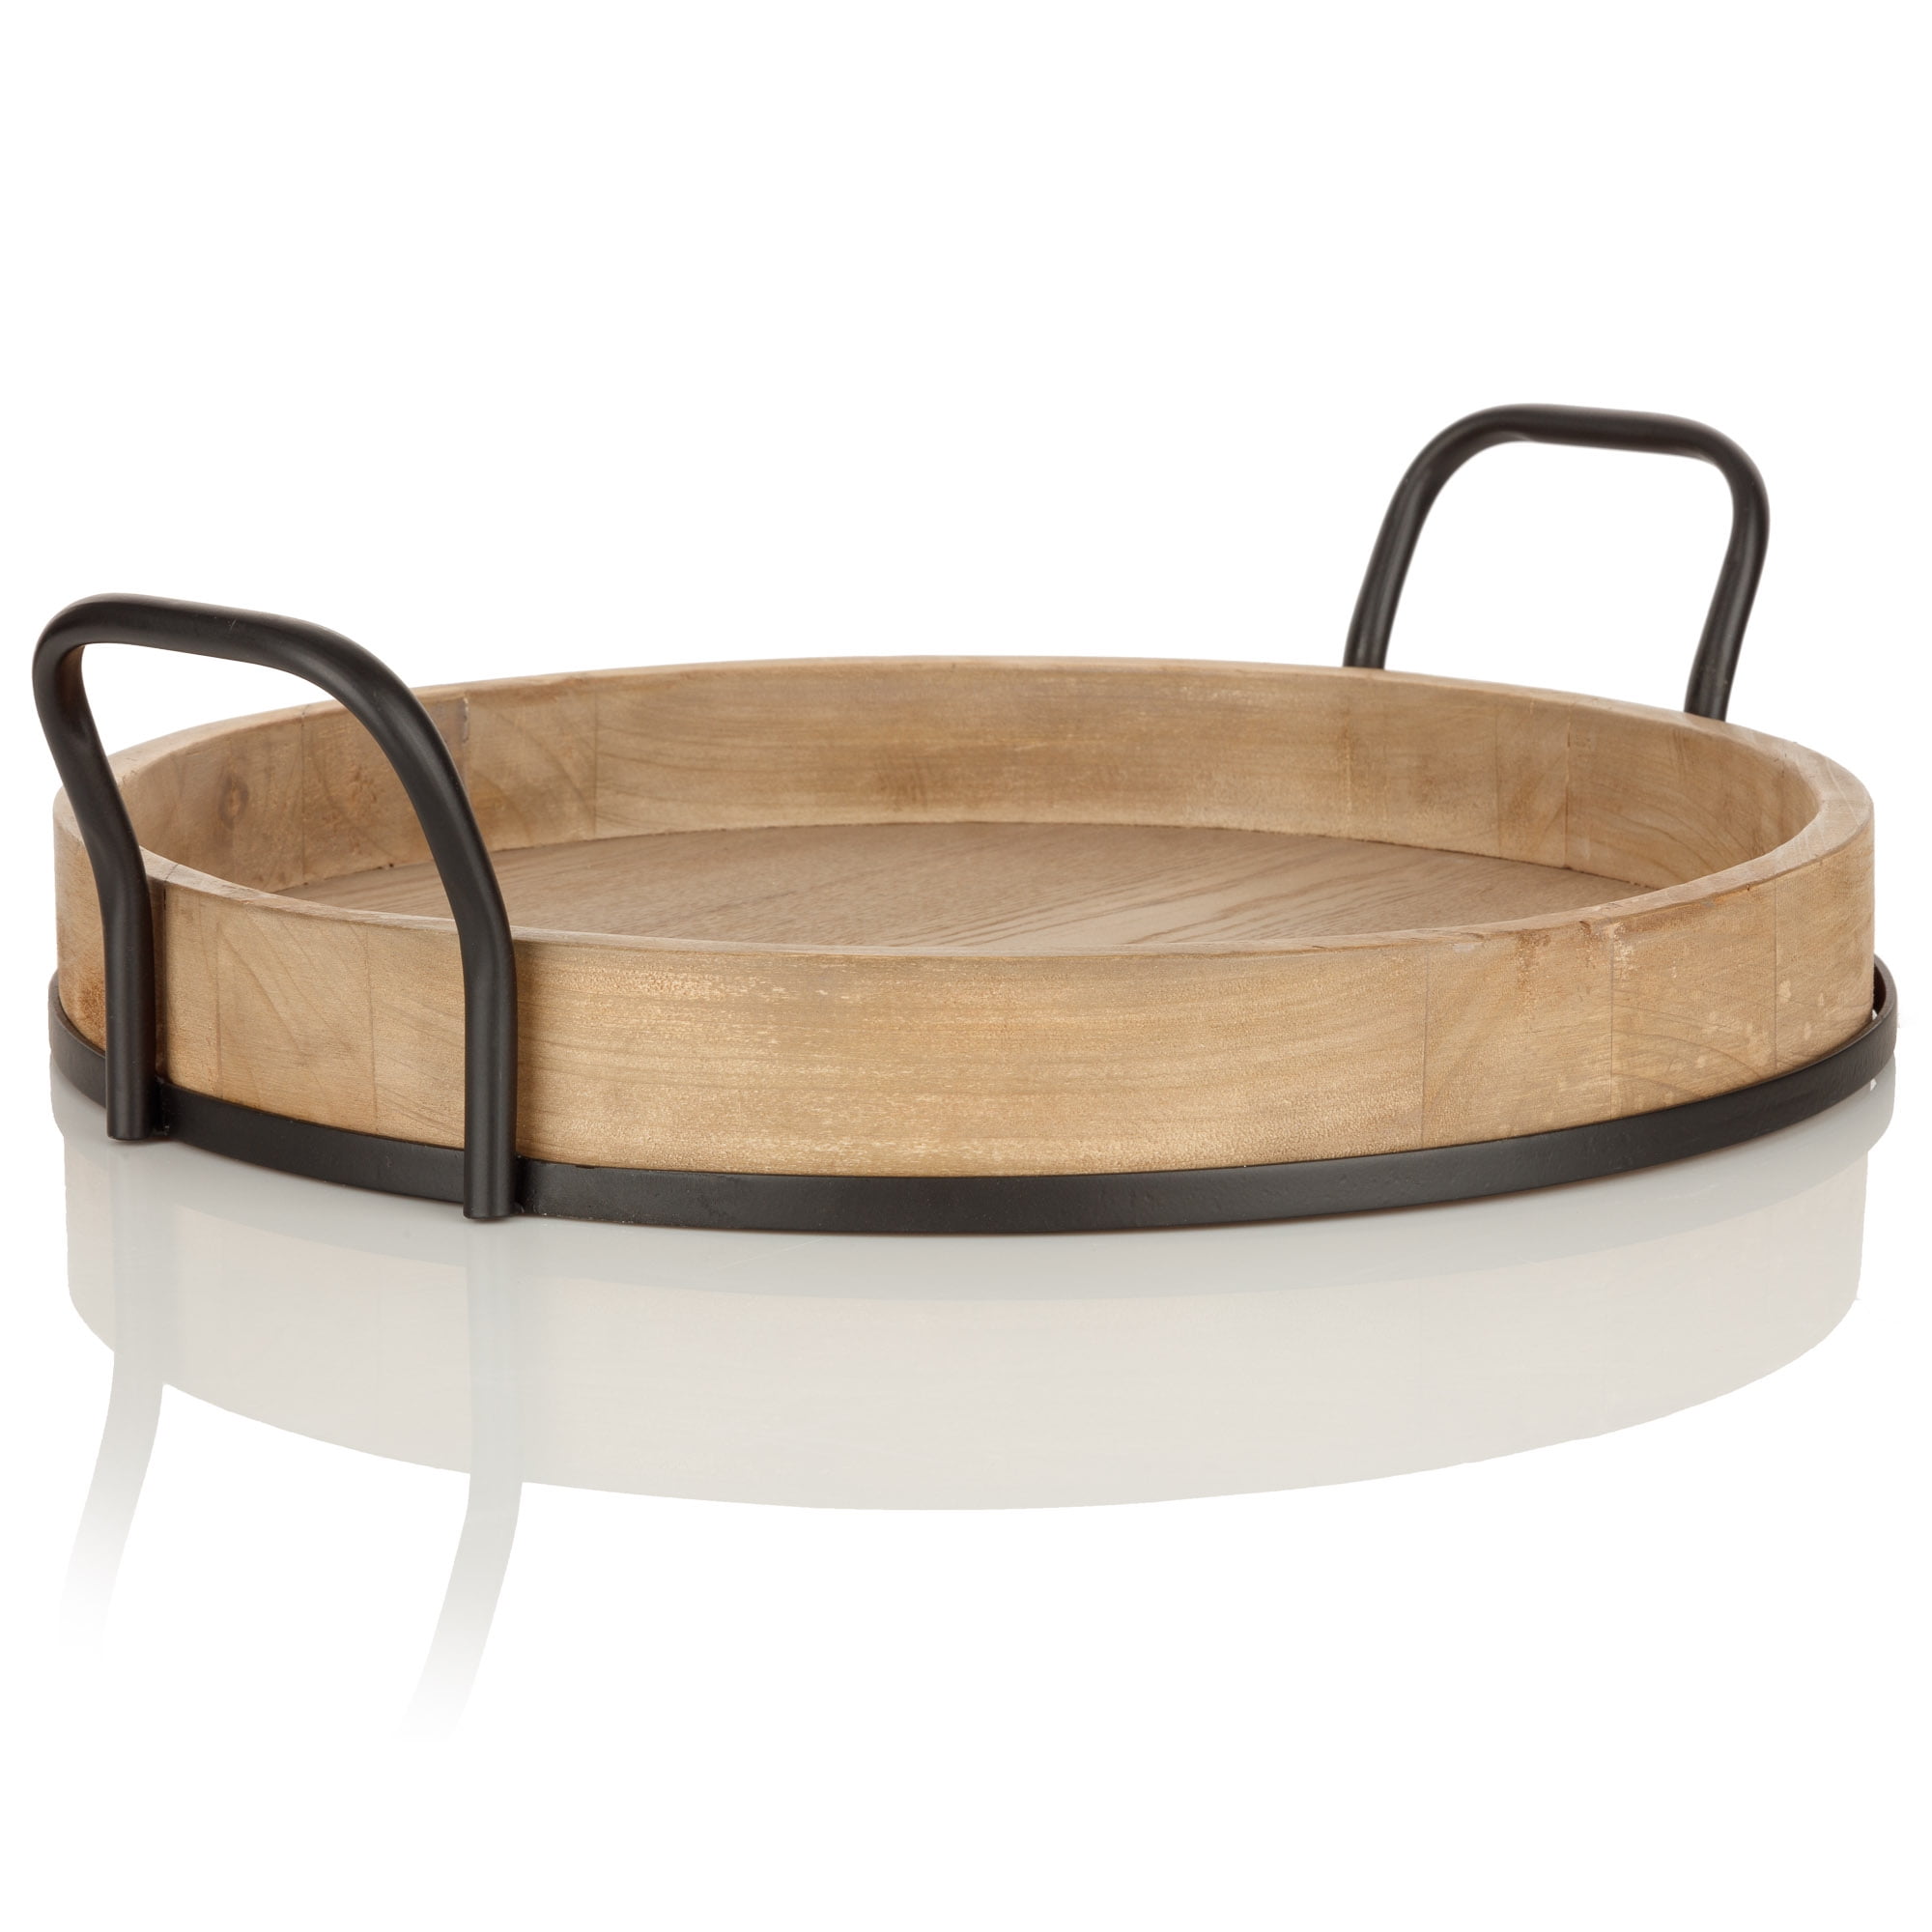 Round Rustic Brown Wood Serving Tray, Round Plastic Serving Tray With Handles